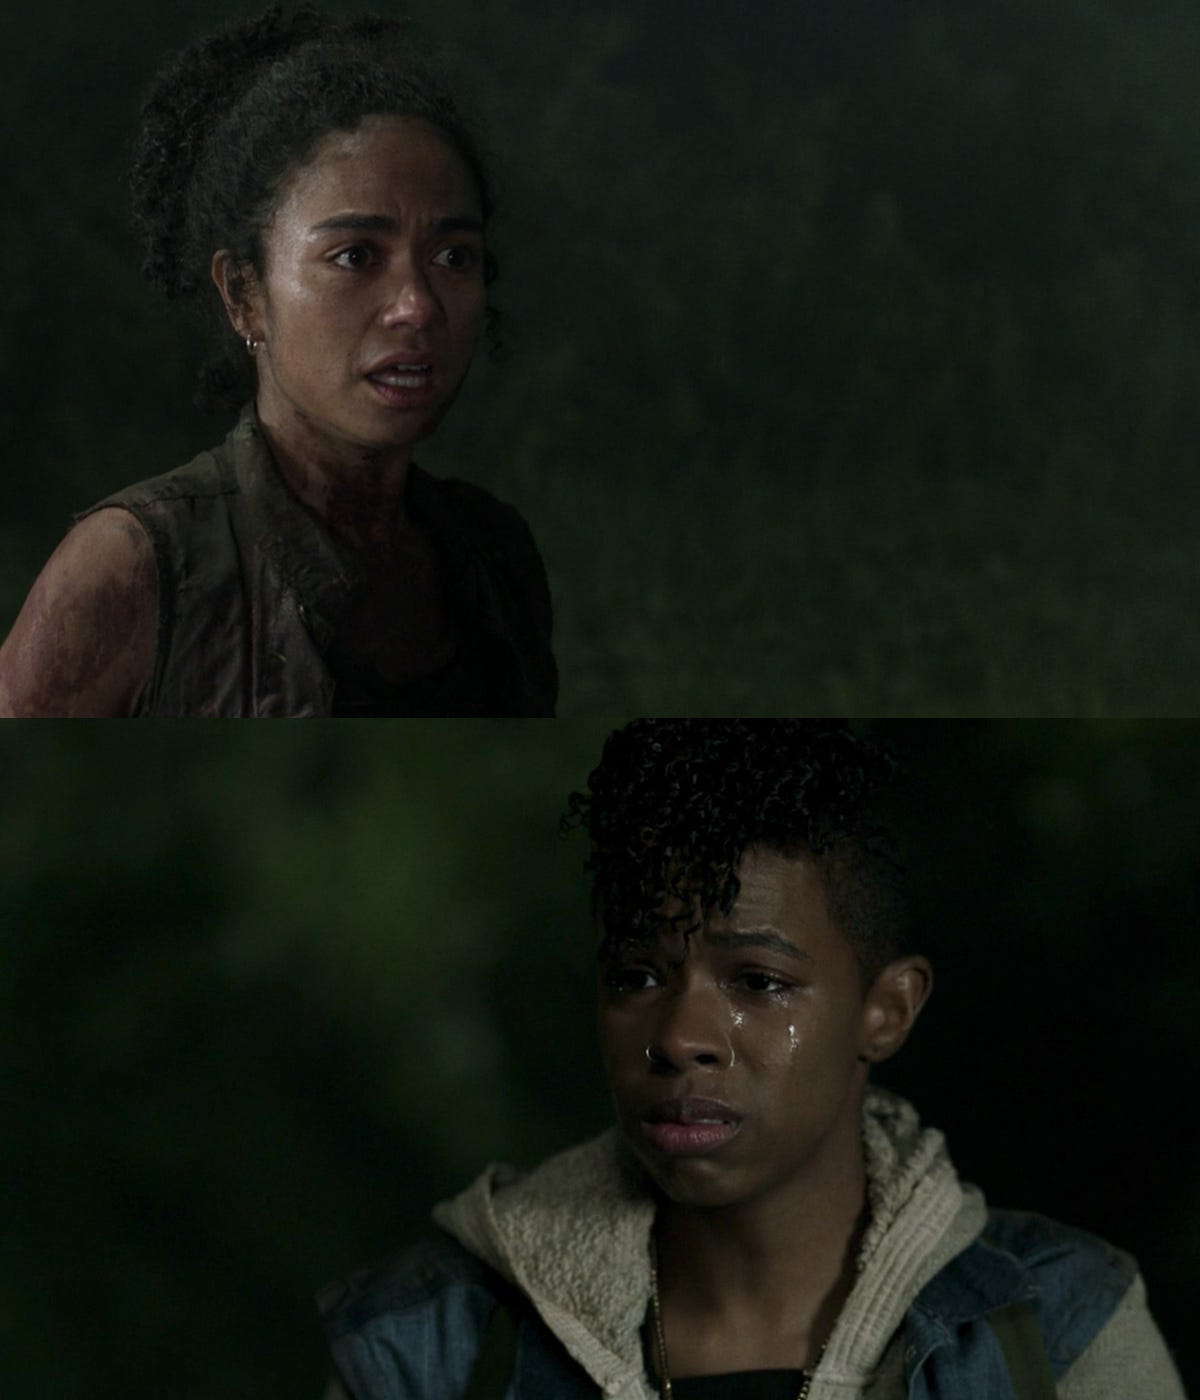 TWD 1106 Connie and Kelly / Lauren Ridloff and Angel Theory reunite